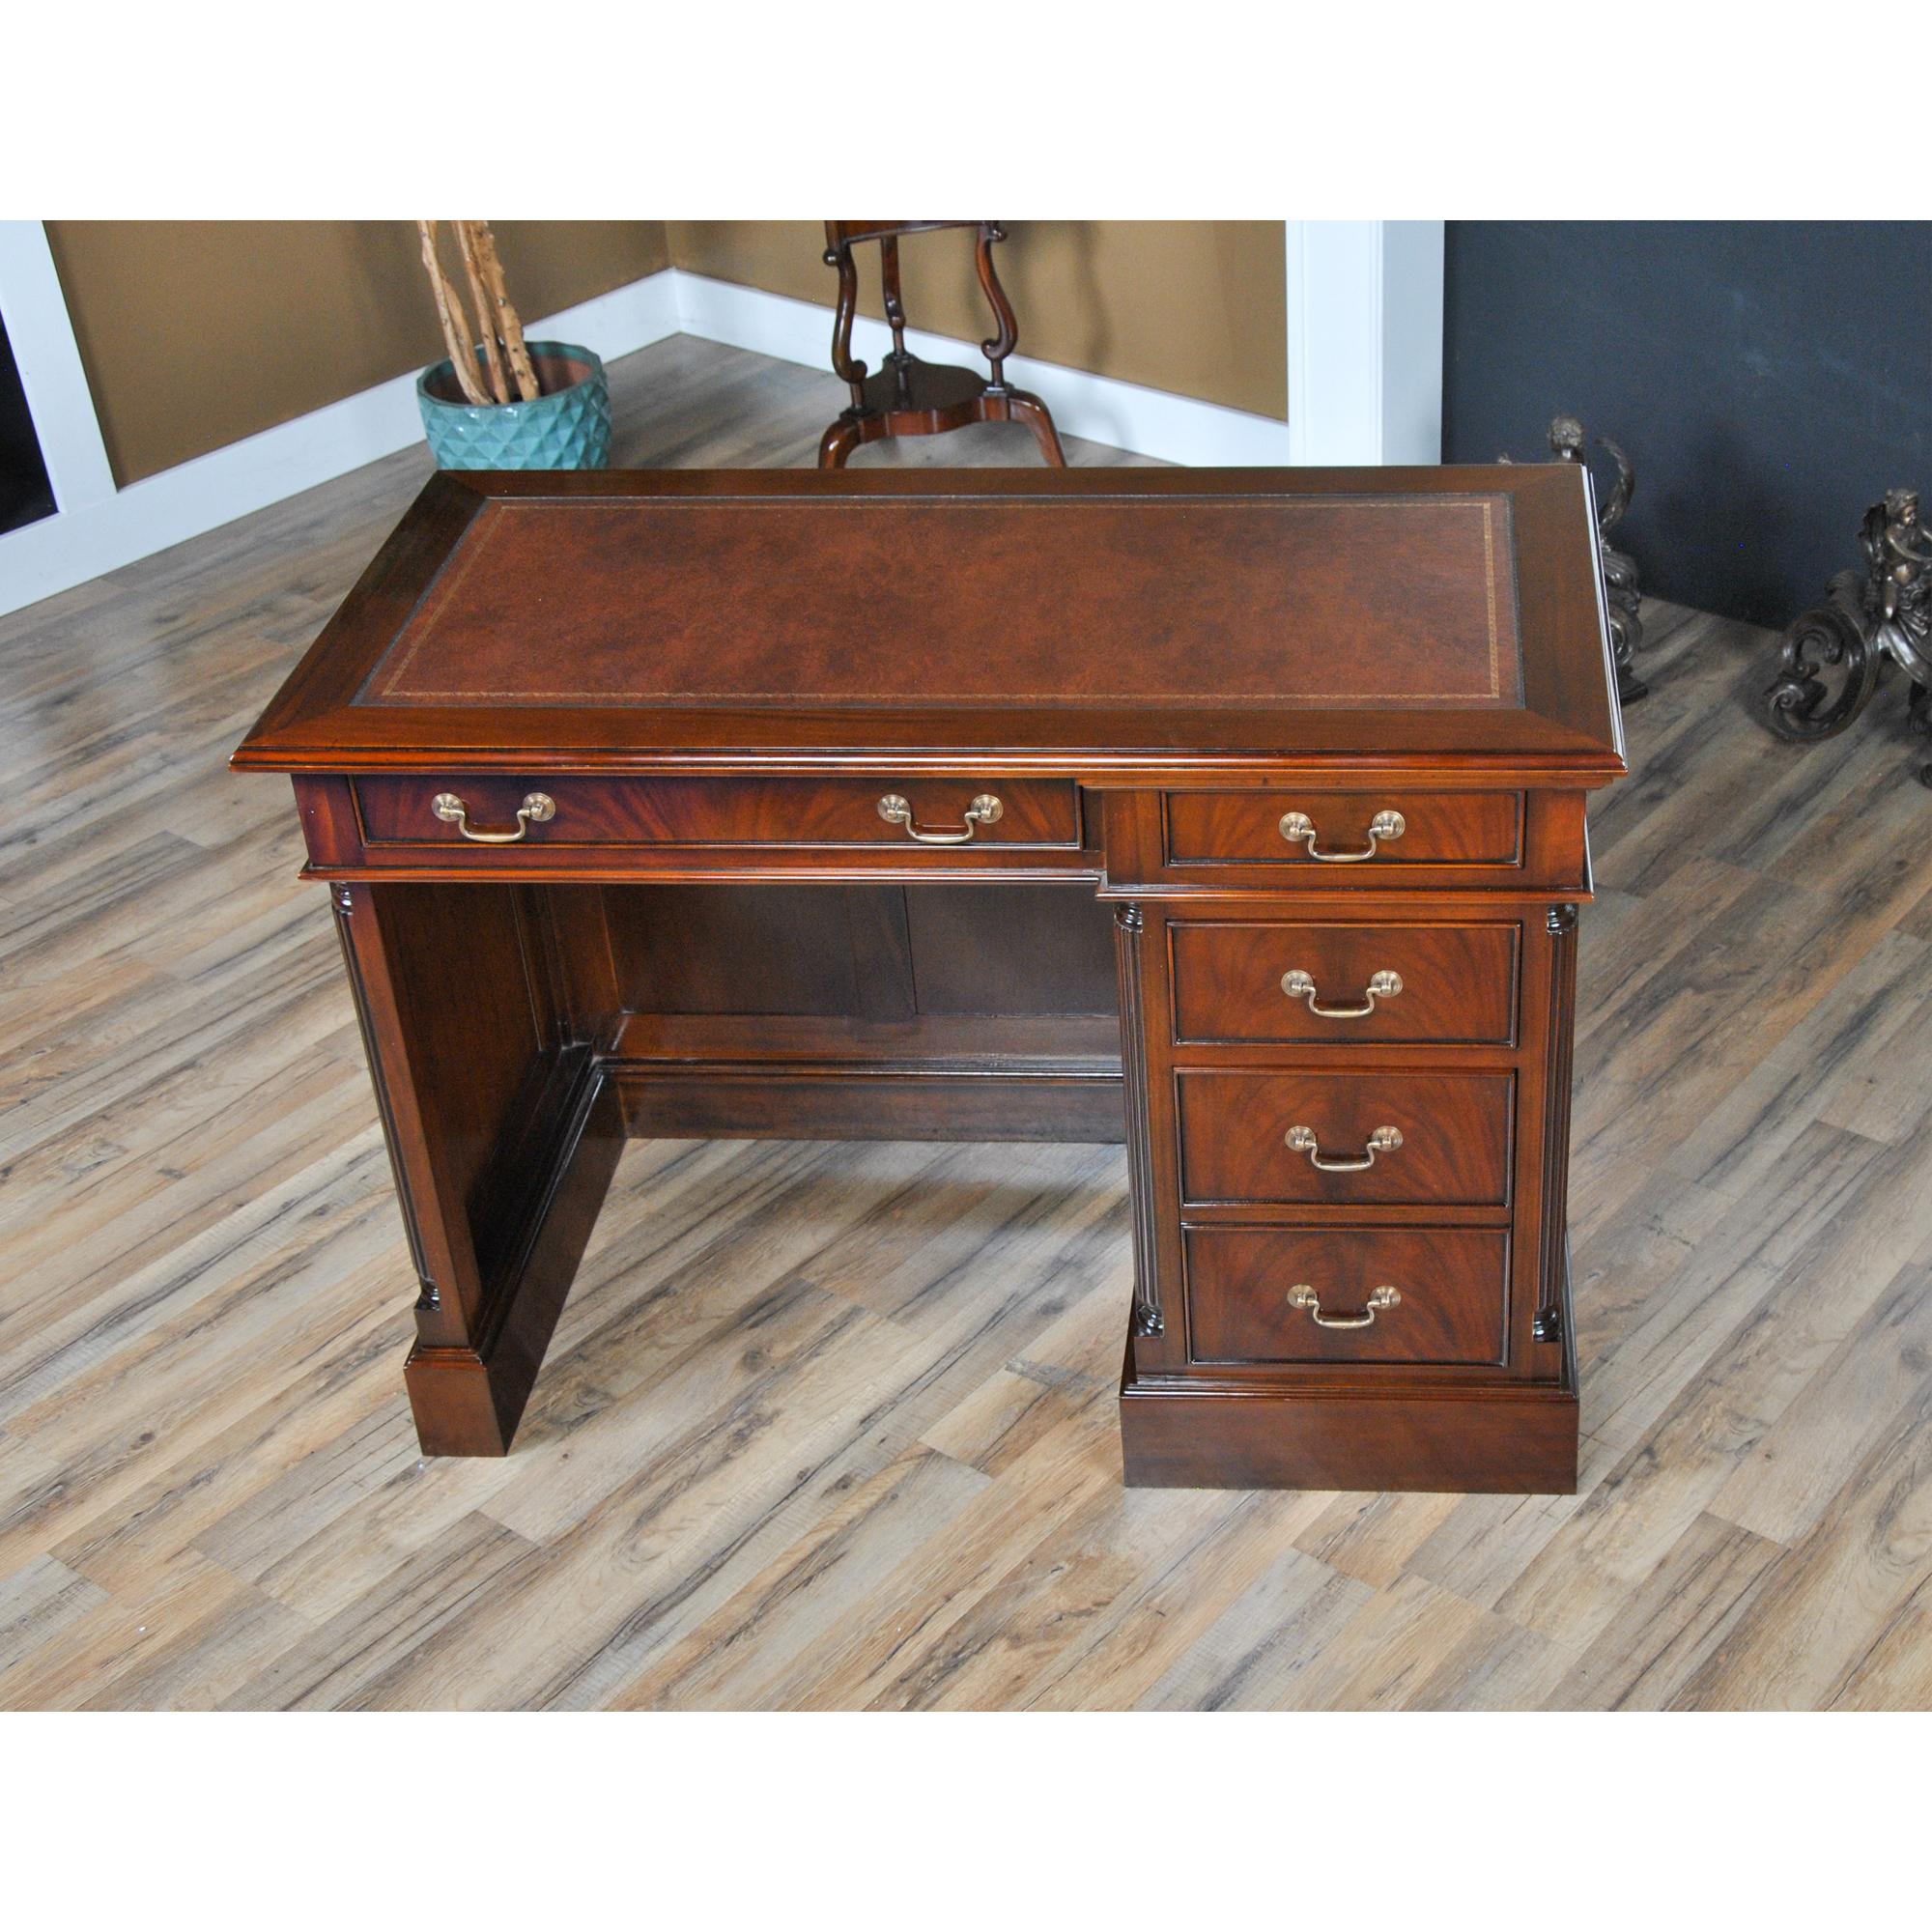 A fine quality Mahogany Single Bank Desk from Niagara Furniture with raised side panels and a rich brown color finish similar to that found in English antiques. The writing surface of brown, full grain genuine leather features antique style gold